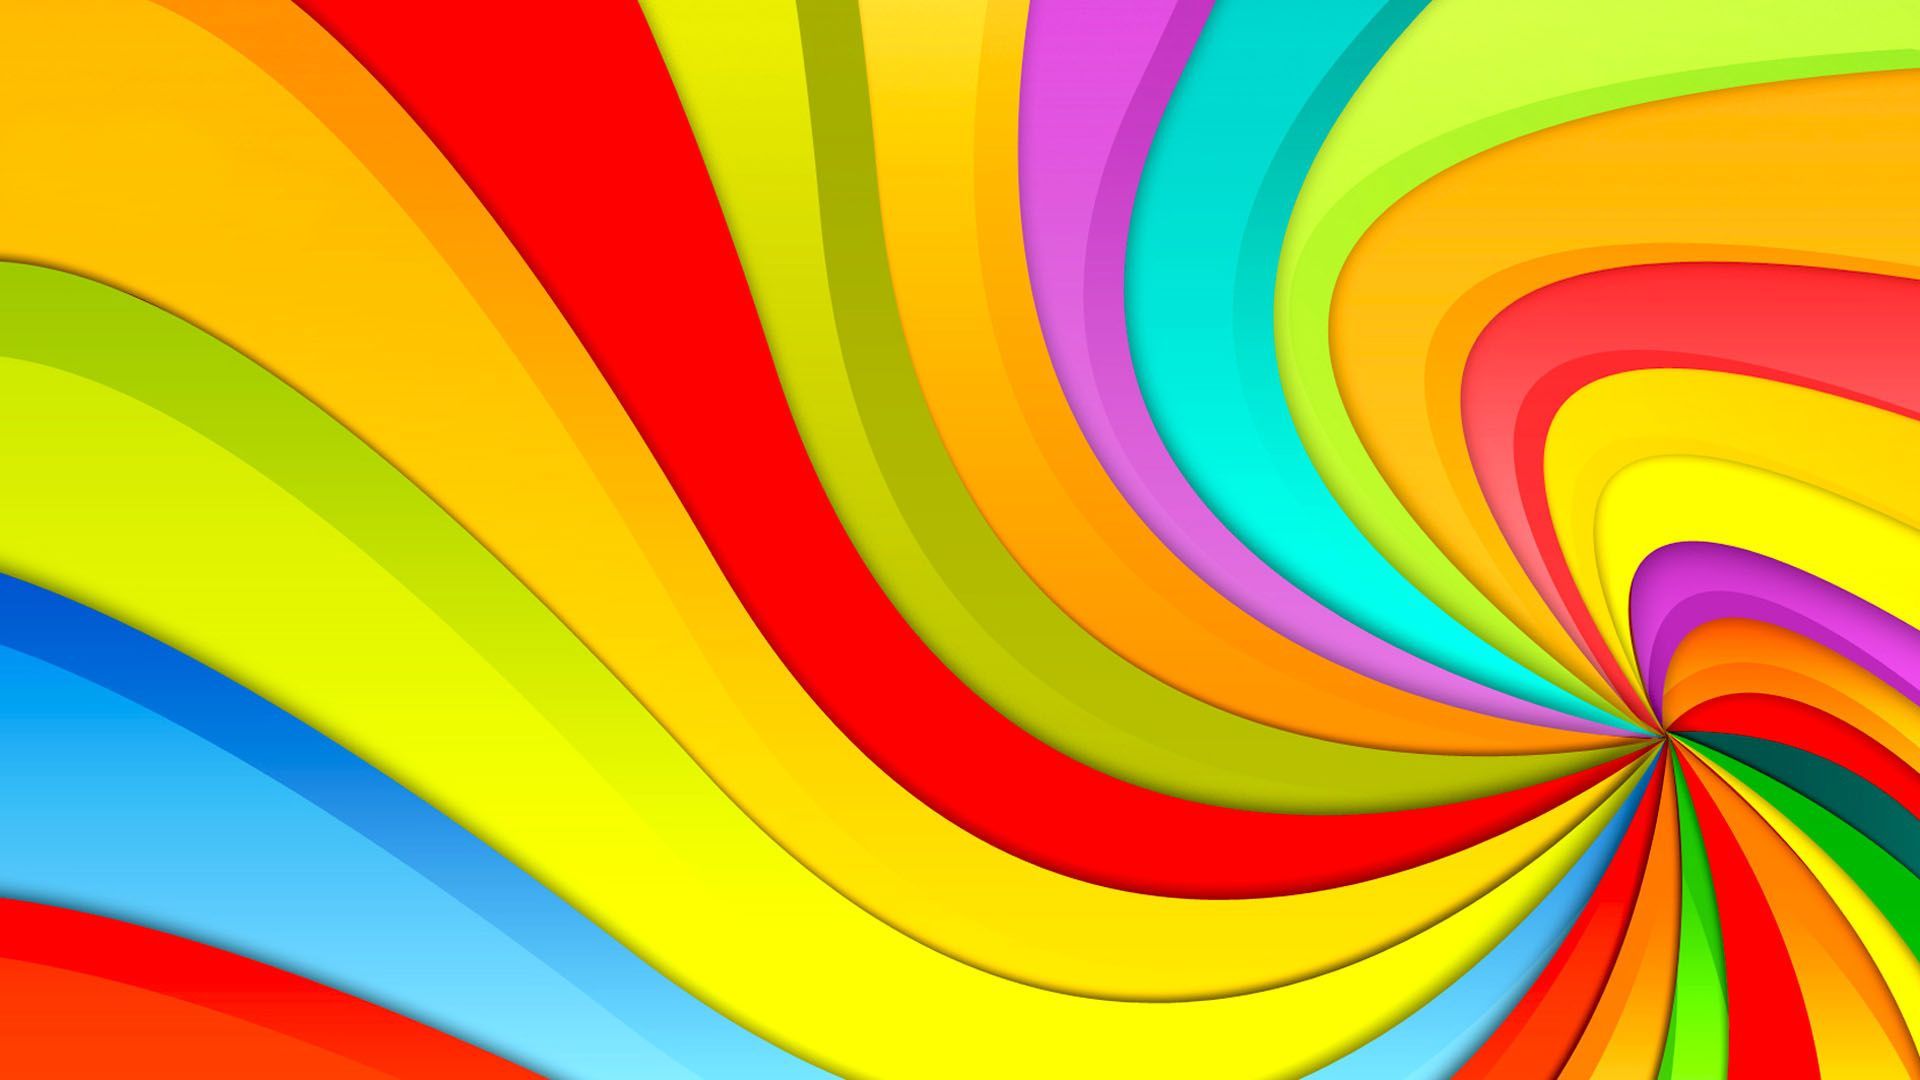 Bright Color Backgrounds wallpaper | 1920x1080 | #10069